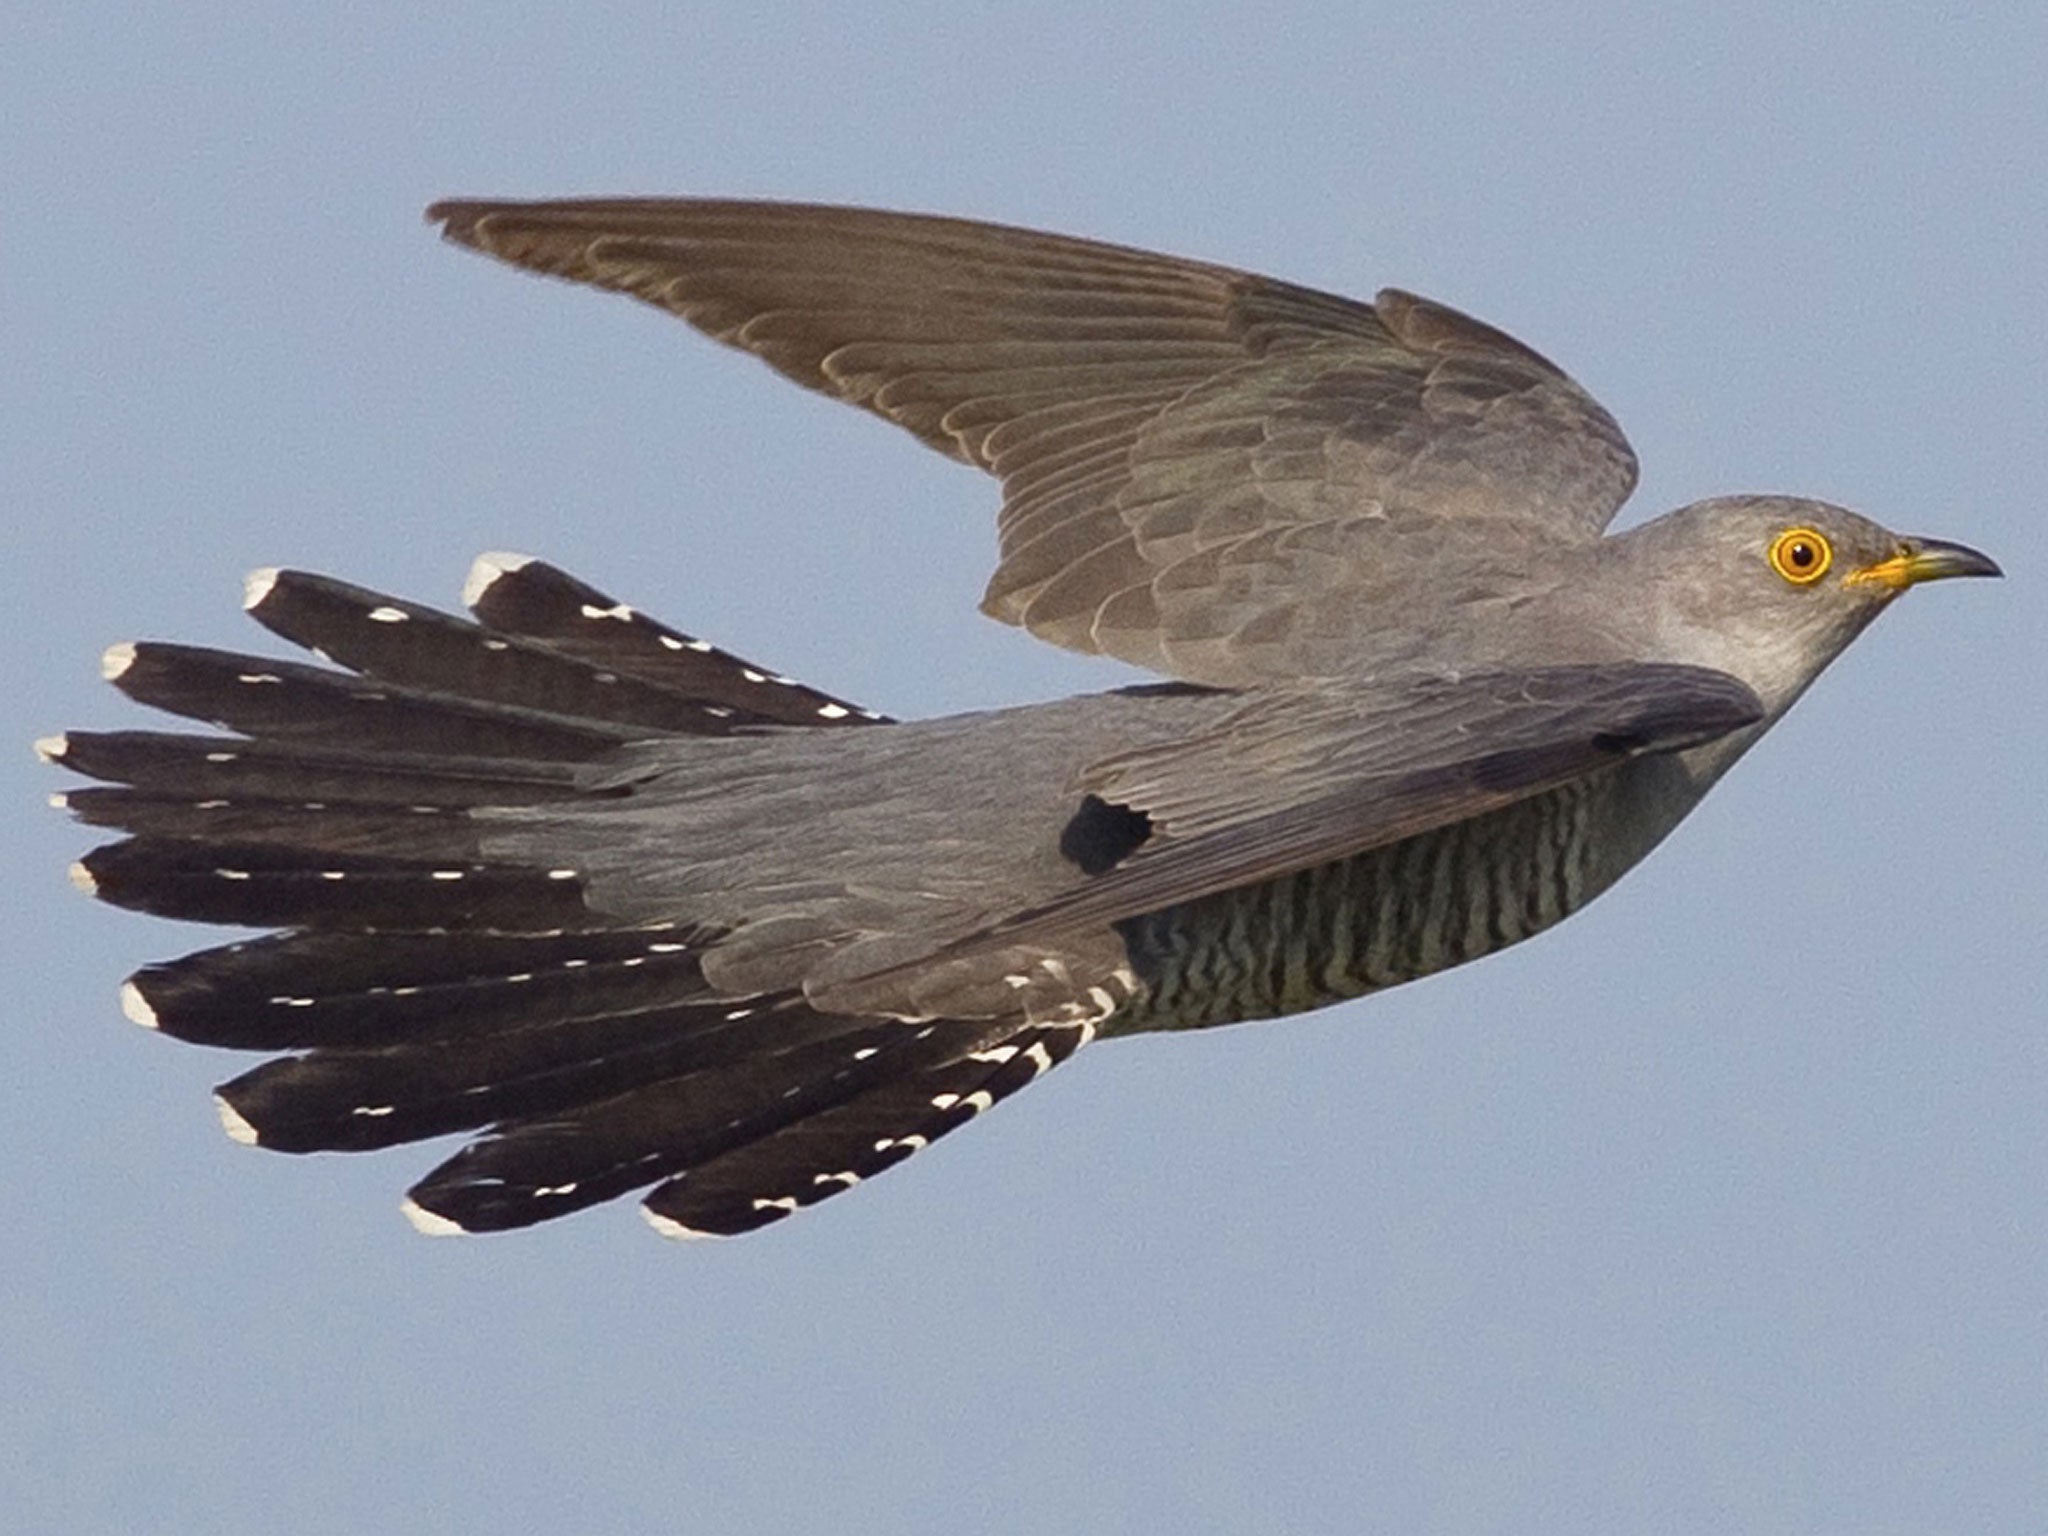 One of the five cuckoos being tracked has decided to stay in France